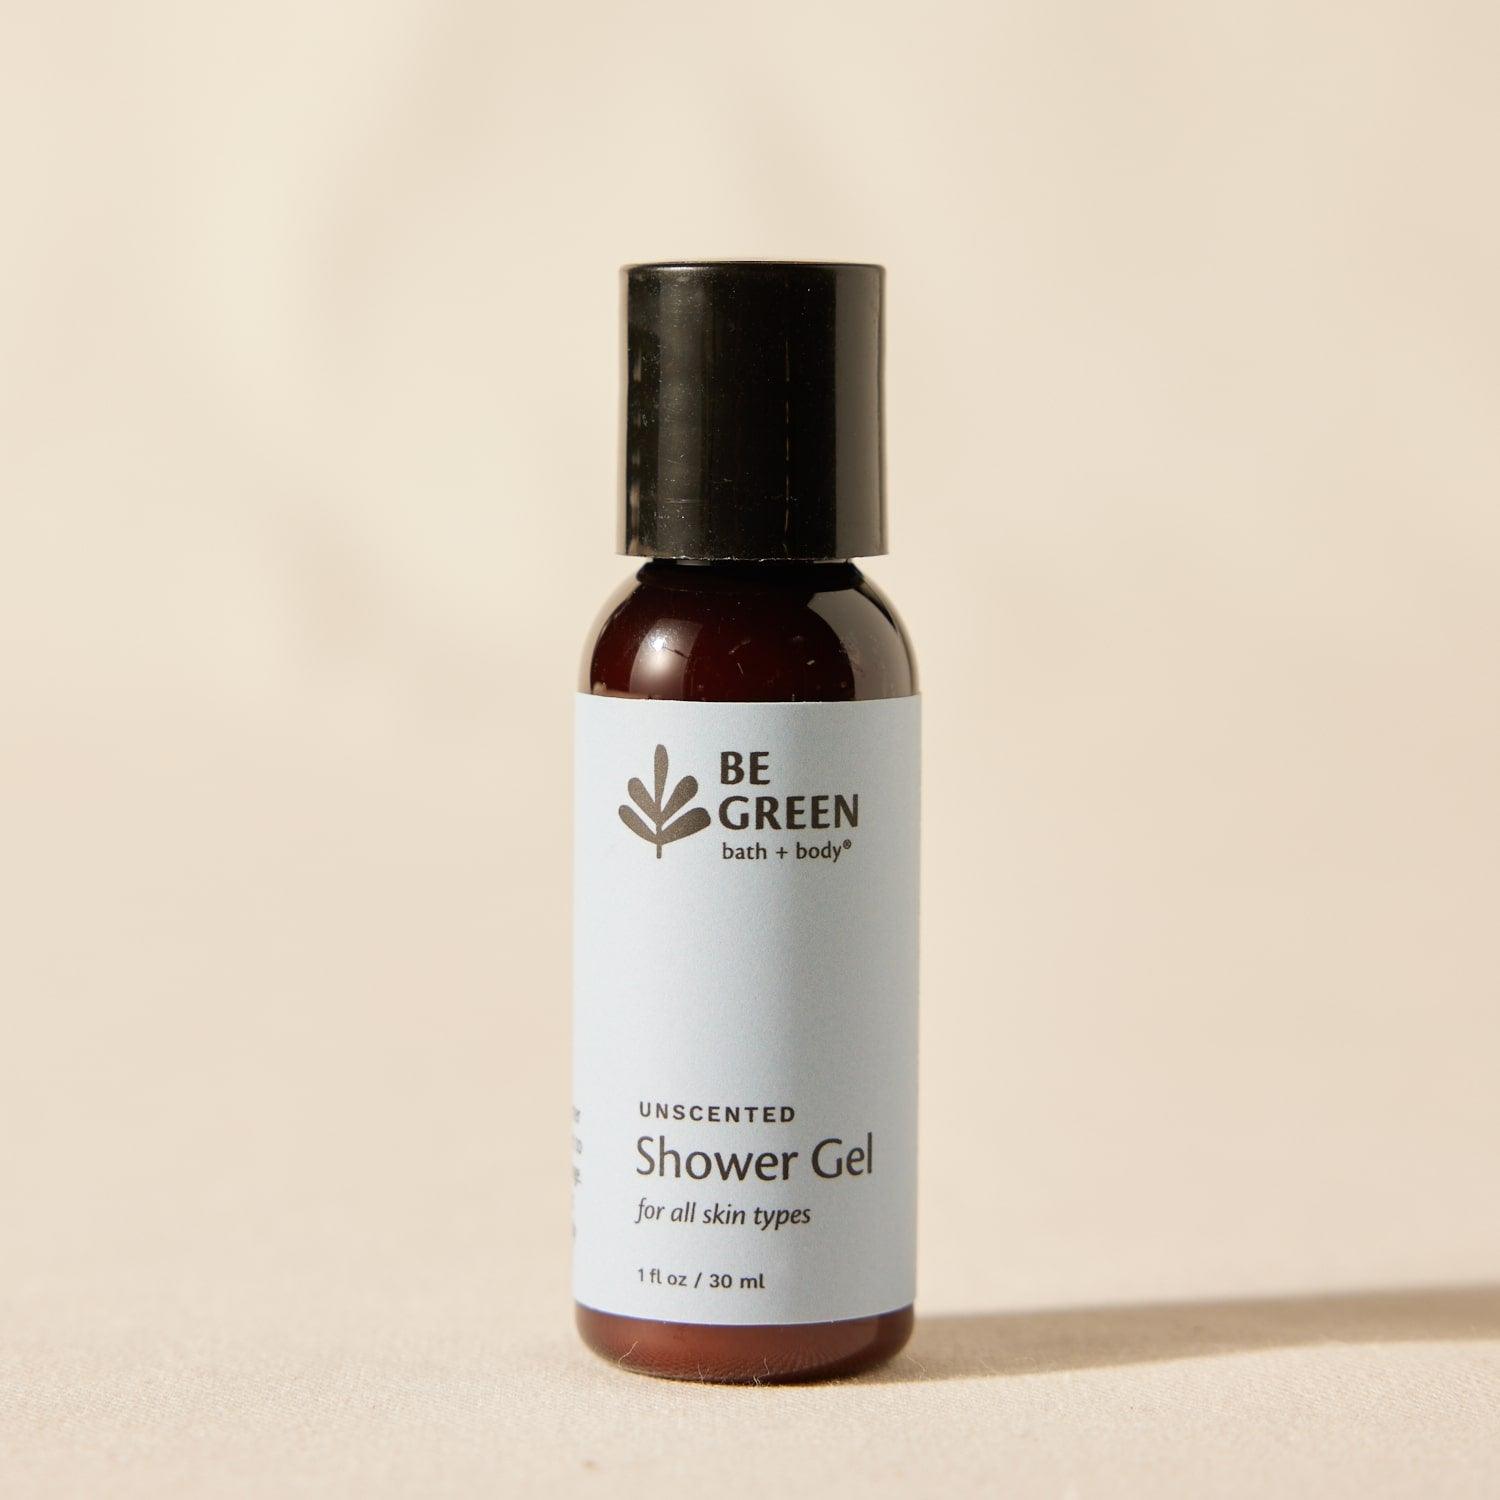 Travel or trial size EWG Verified unscented shower gel with organic ingredients.